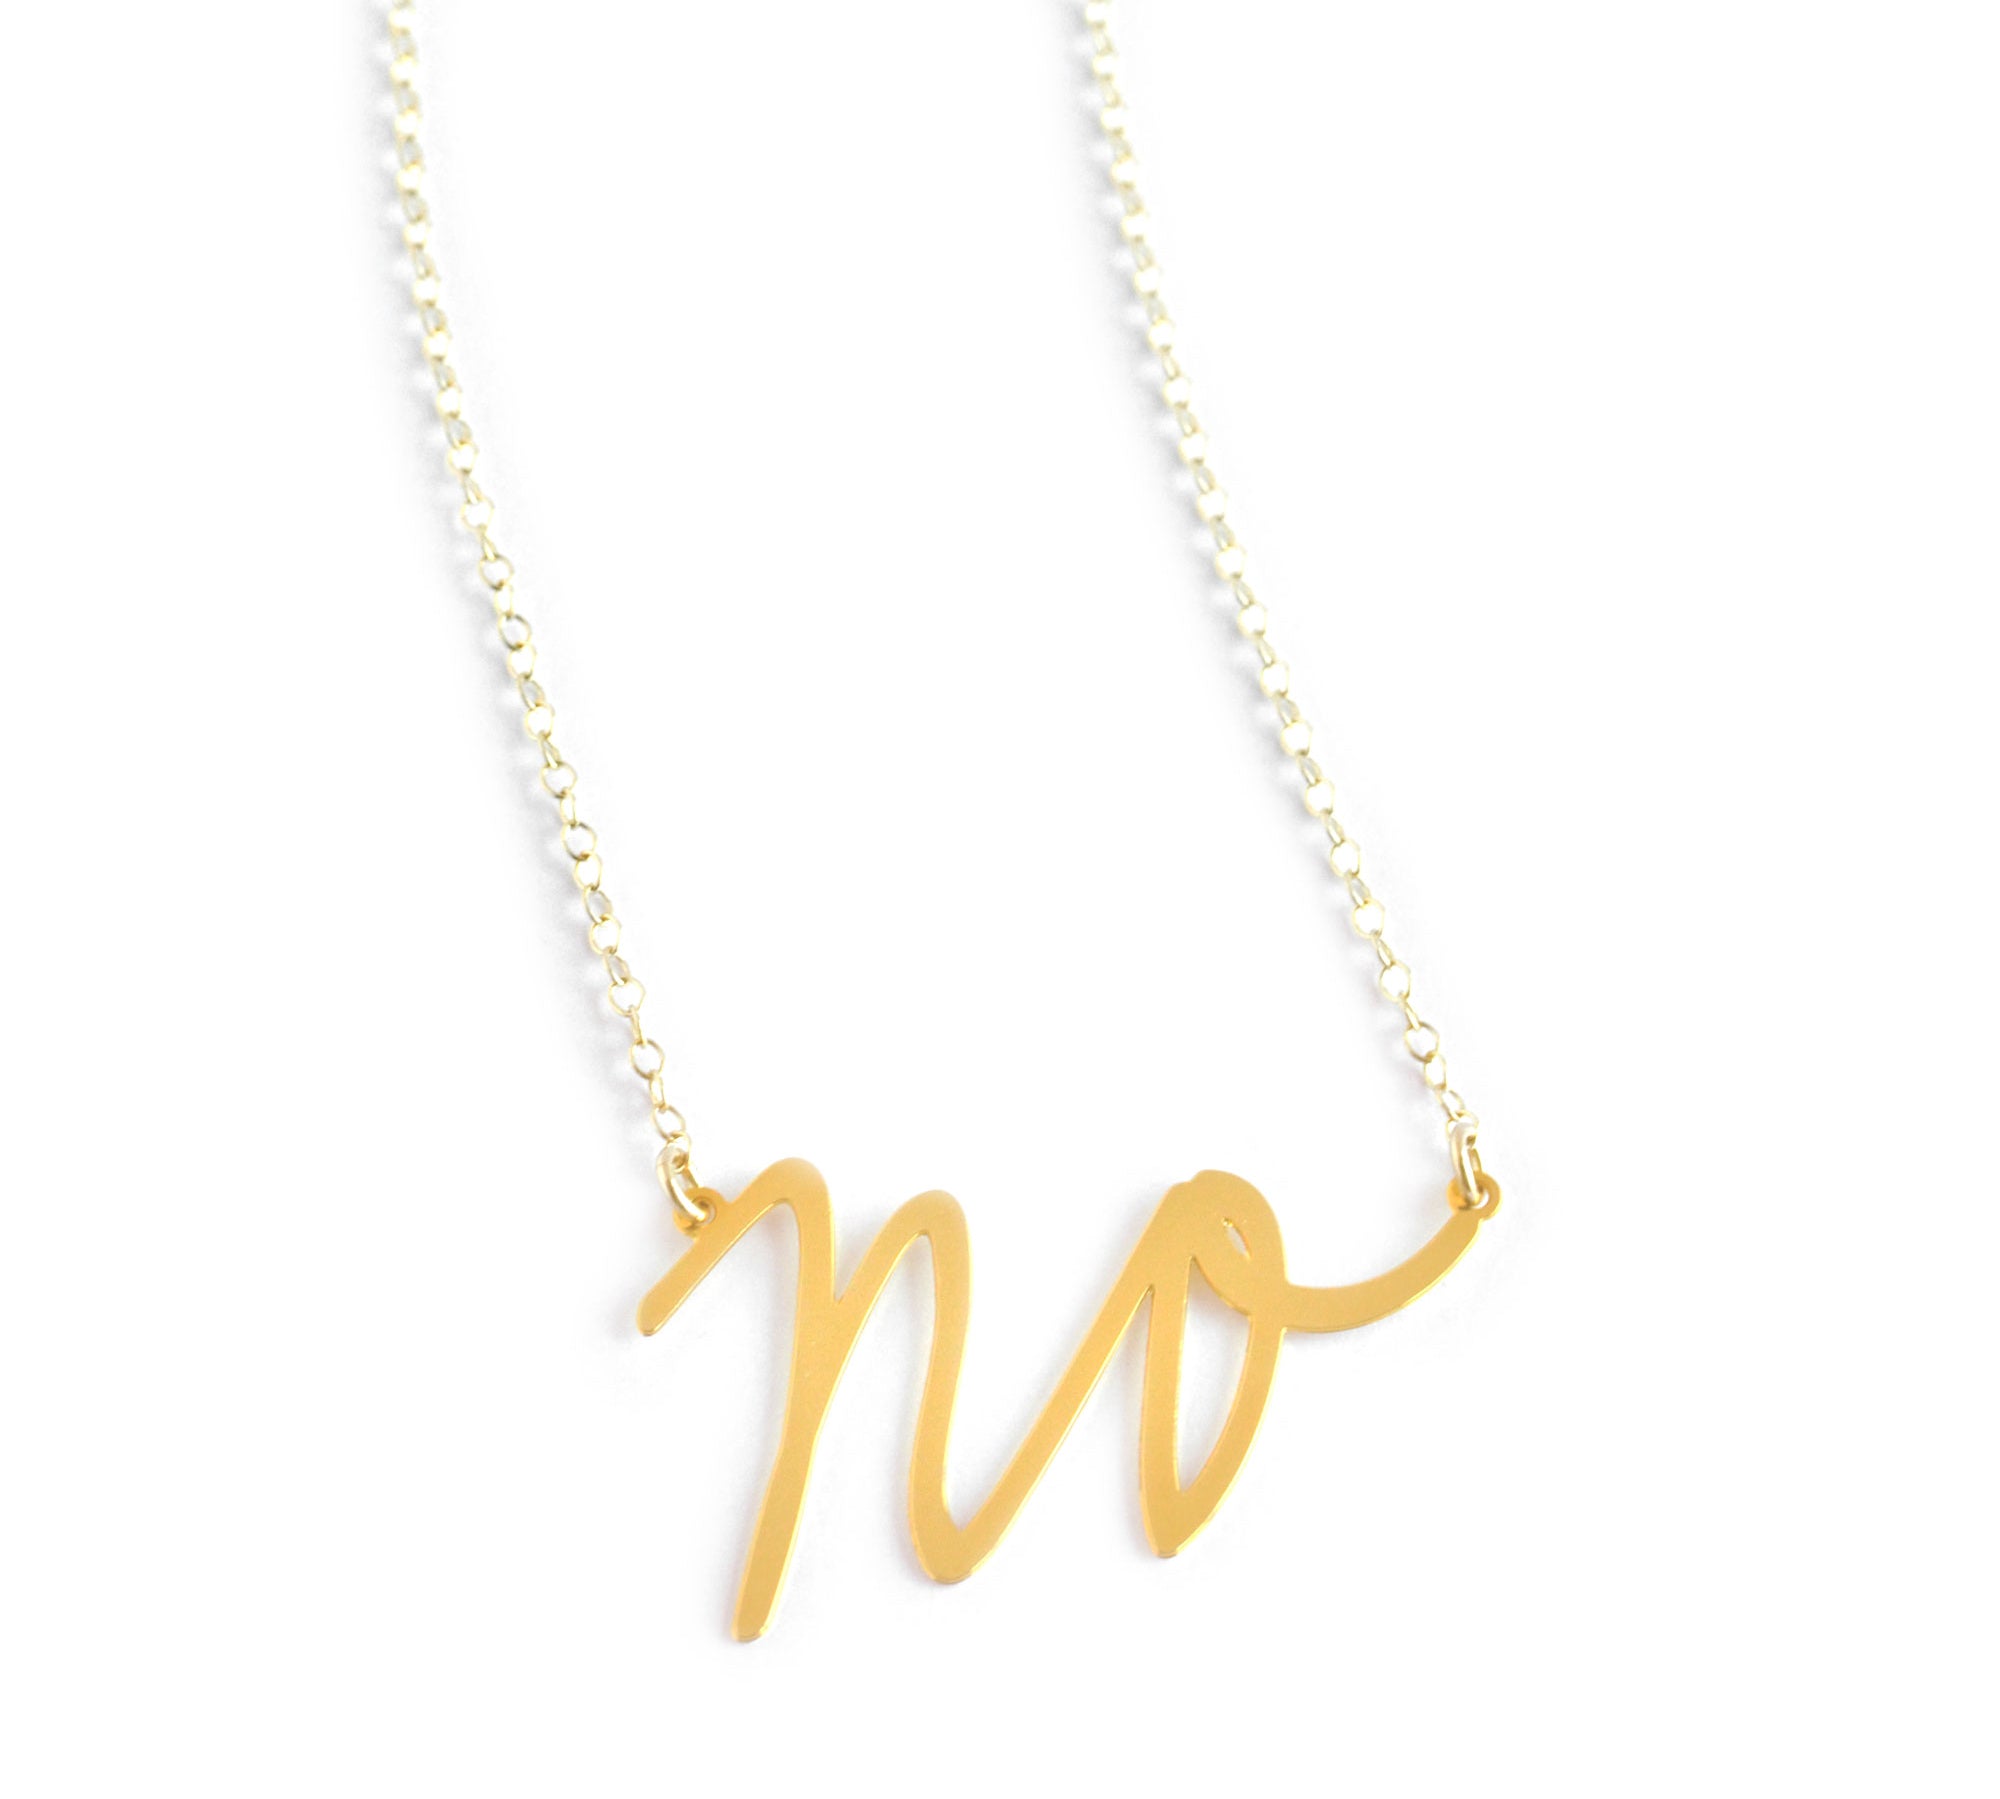 No Necklace - High Quality, Affordable, Hand Written, Self Love, Mantra Word Necklace - Available in Gold and Silver - Small and Large Sizes - Made in USA - Brevity Jewelry